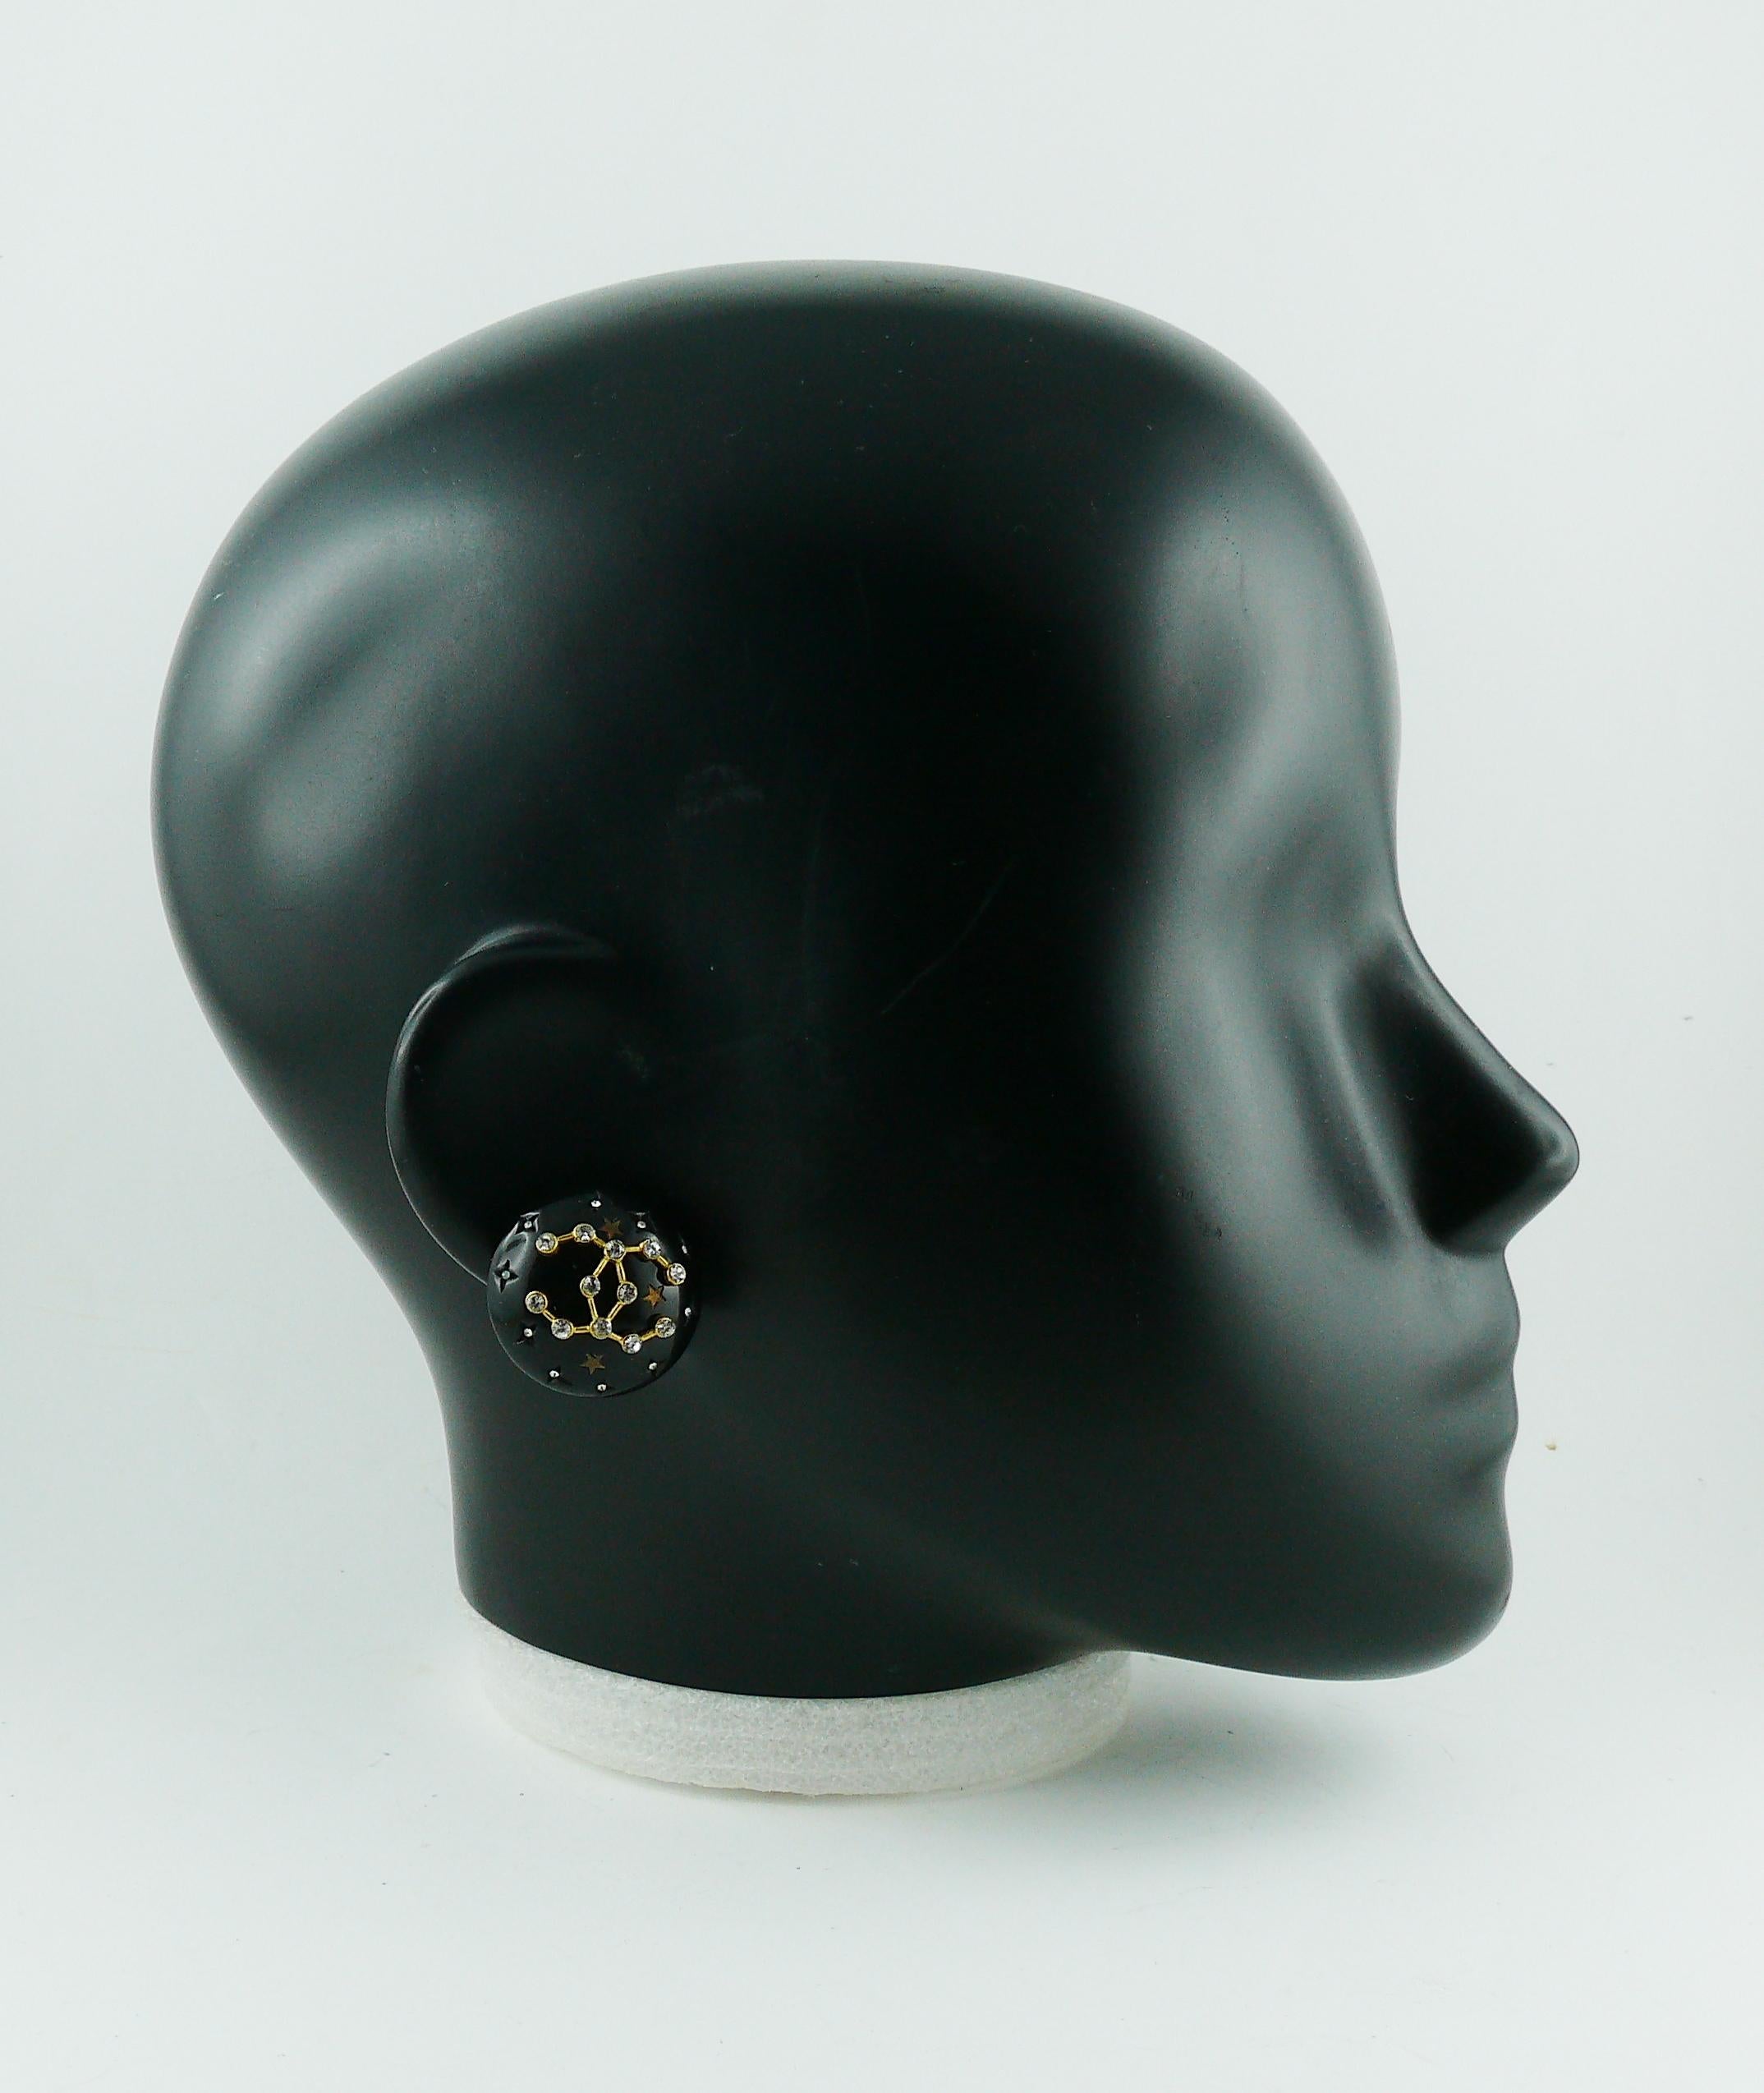 CHANEL vintage 1995 black resin clip on earrings featuring a CC constellation design embellished with clear crystals.

Fall/Winter Collection 1995.

Embossed CHANEL 95 A Made in France.

Indicative measurements : diameter approx. 2.5 cm (0.98